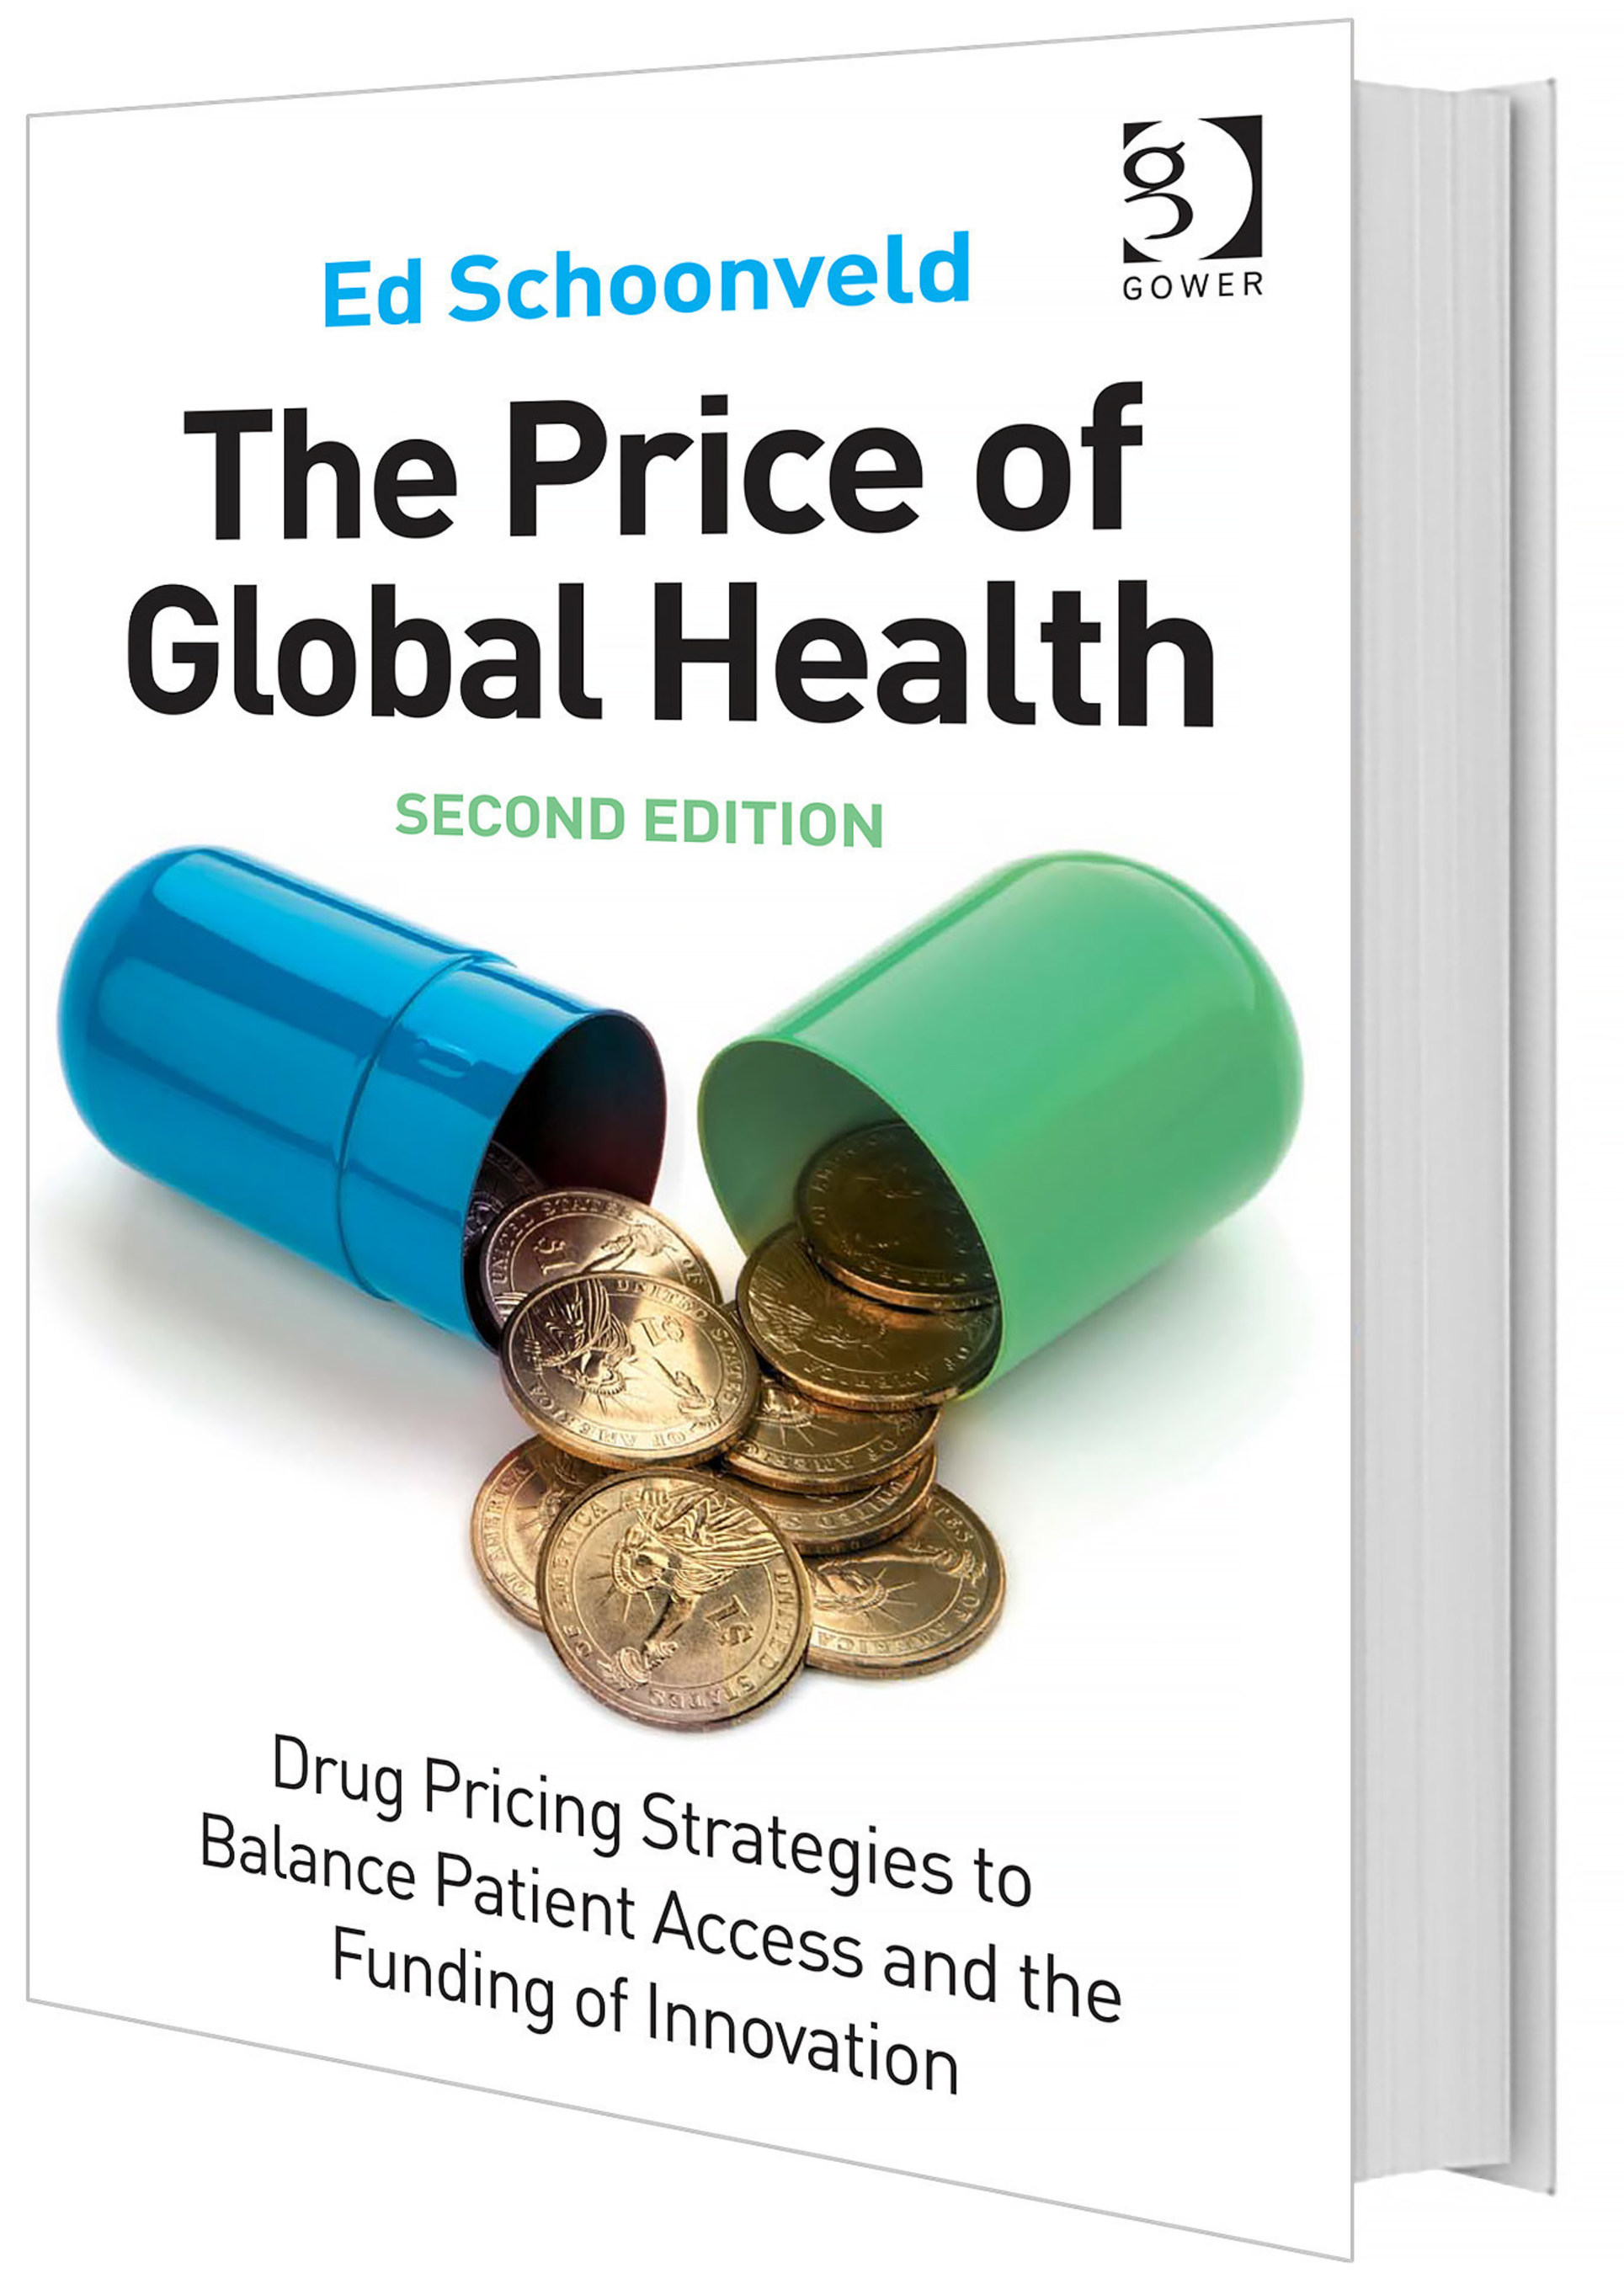 Drug pricing and market access expert tackles global drug pricing debate in "The Price of Global Health"